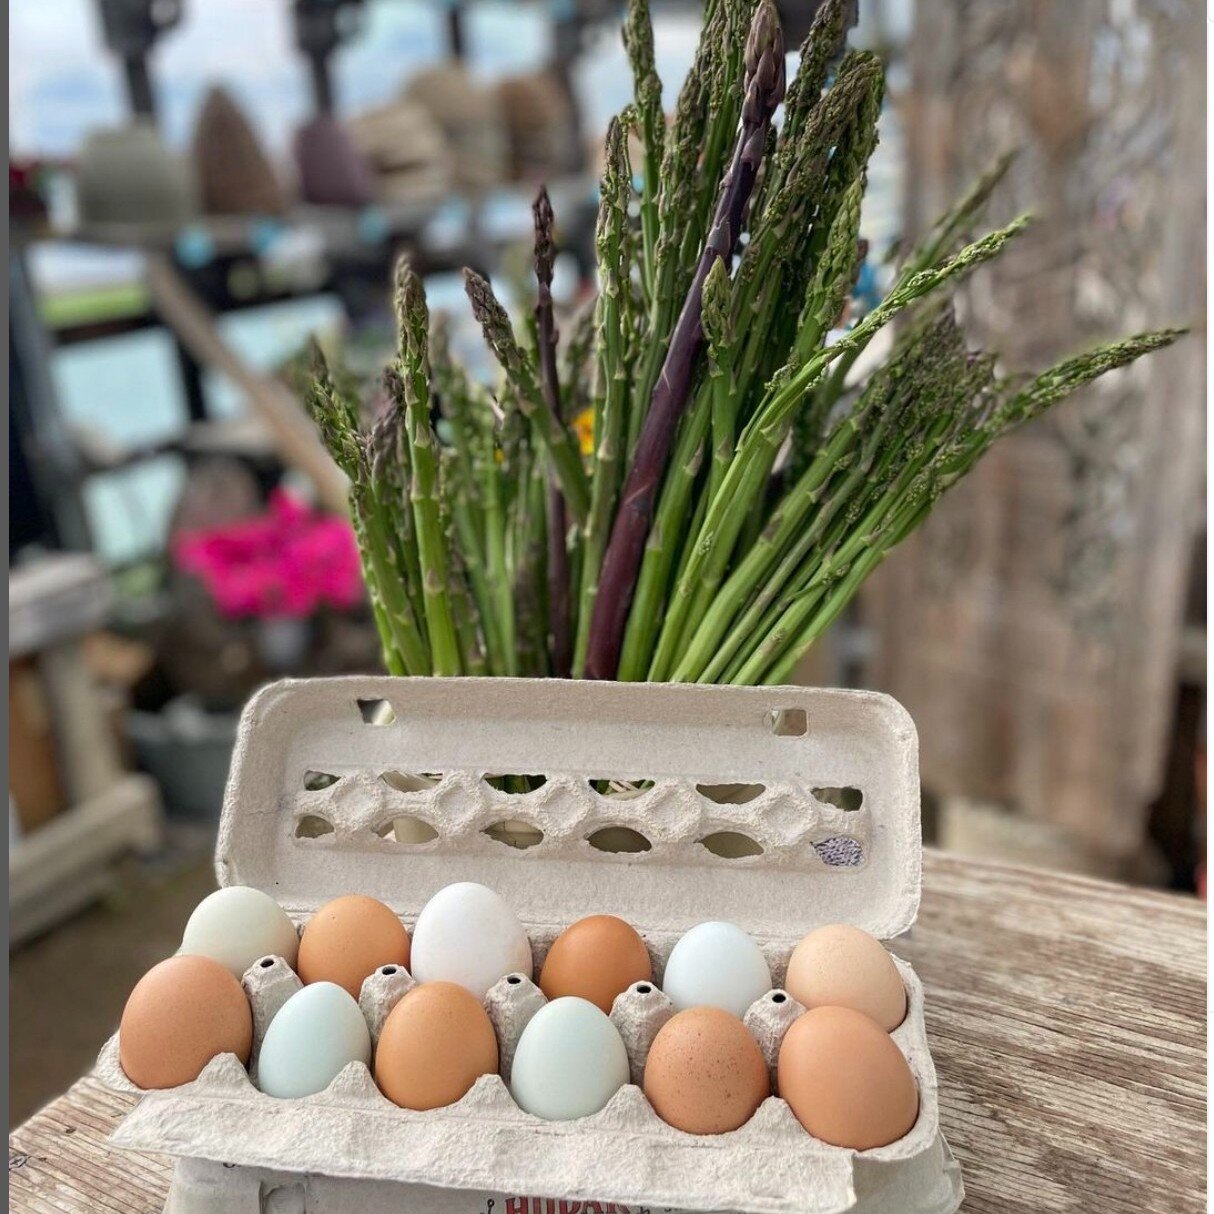 Just over a week until our next winter farmers market and Easter Sunday! If you're looking for an egg supply, be sure to swing by the market and check out @hudakfarm, who also happen to be our featured vendor of the week...

🌷🥕🥚 @hudakfarm is a fa